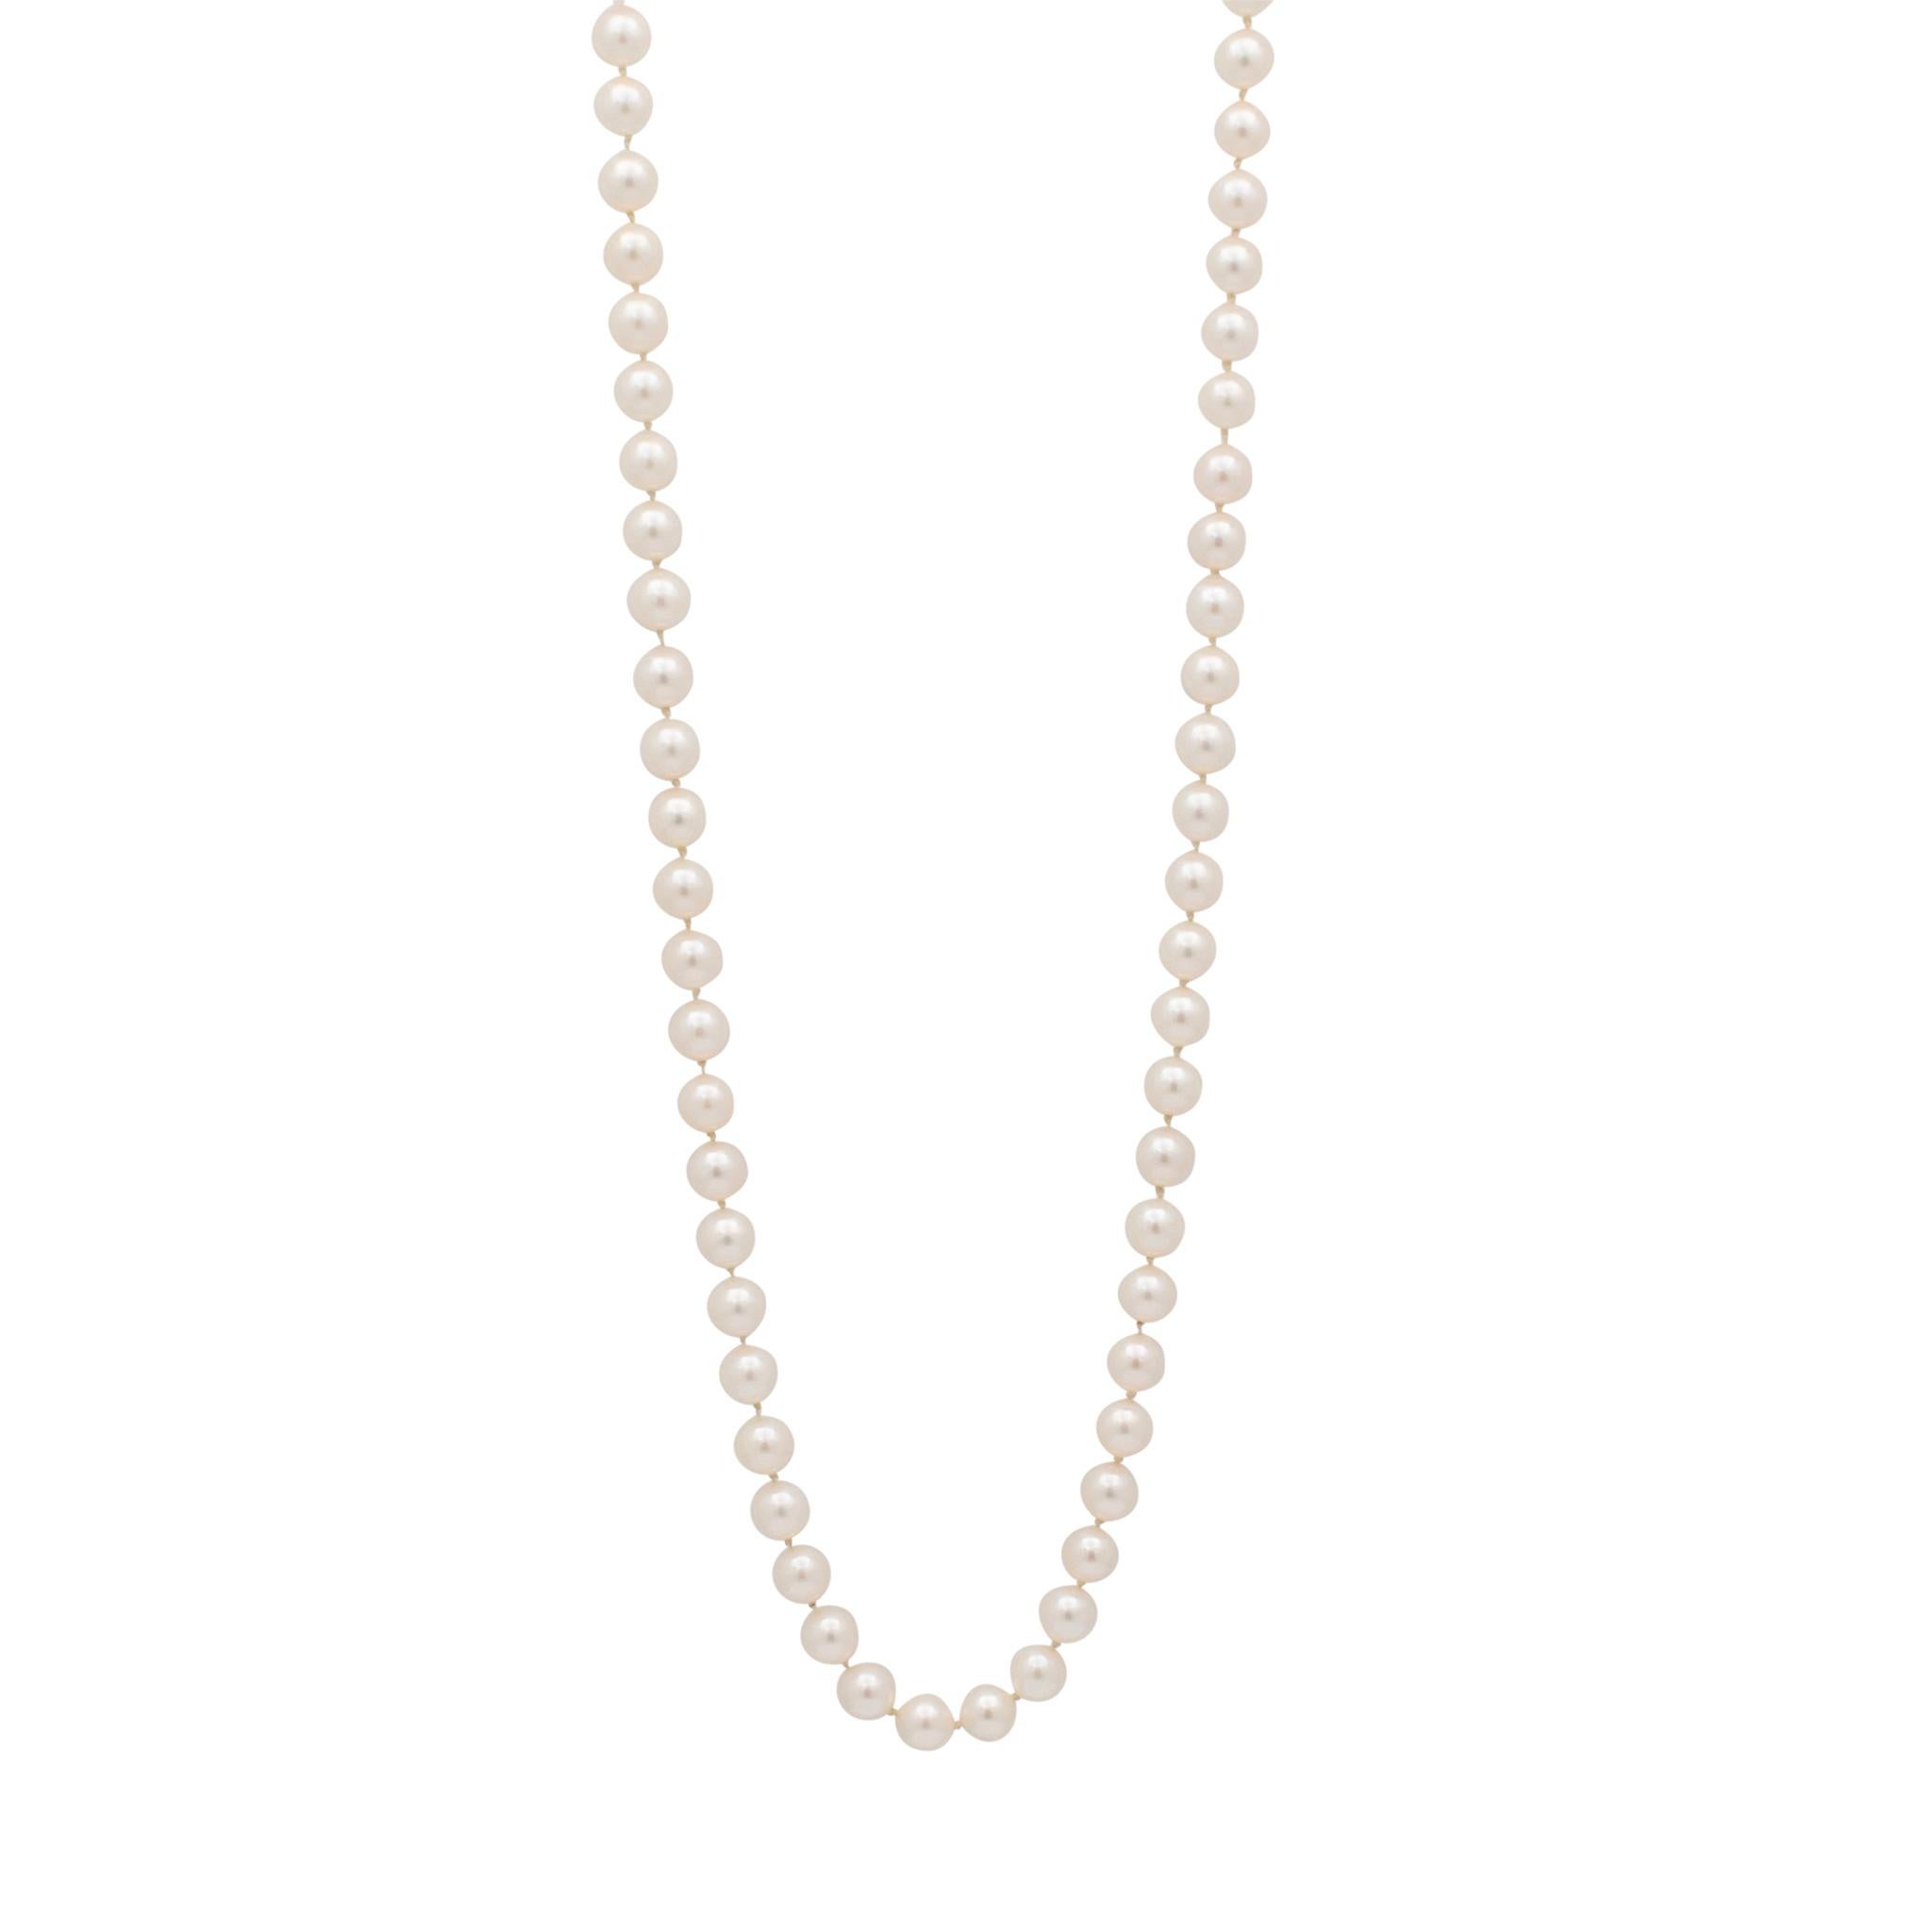 Brand: Mikimoto

Metal Type: 18K Yellow Gold

Length: 25.00 inches

Diameter: 6.50 mm

Weight: 36.22 grams

One knotted single-strand matinee uniform Mikimoto pearl necklace. Engraved with 